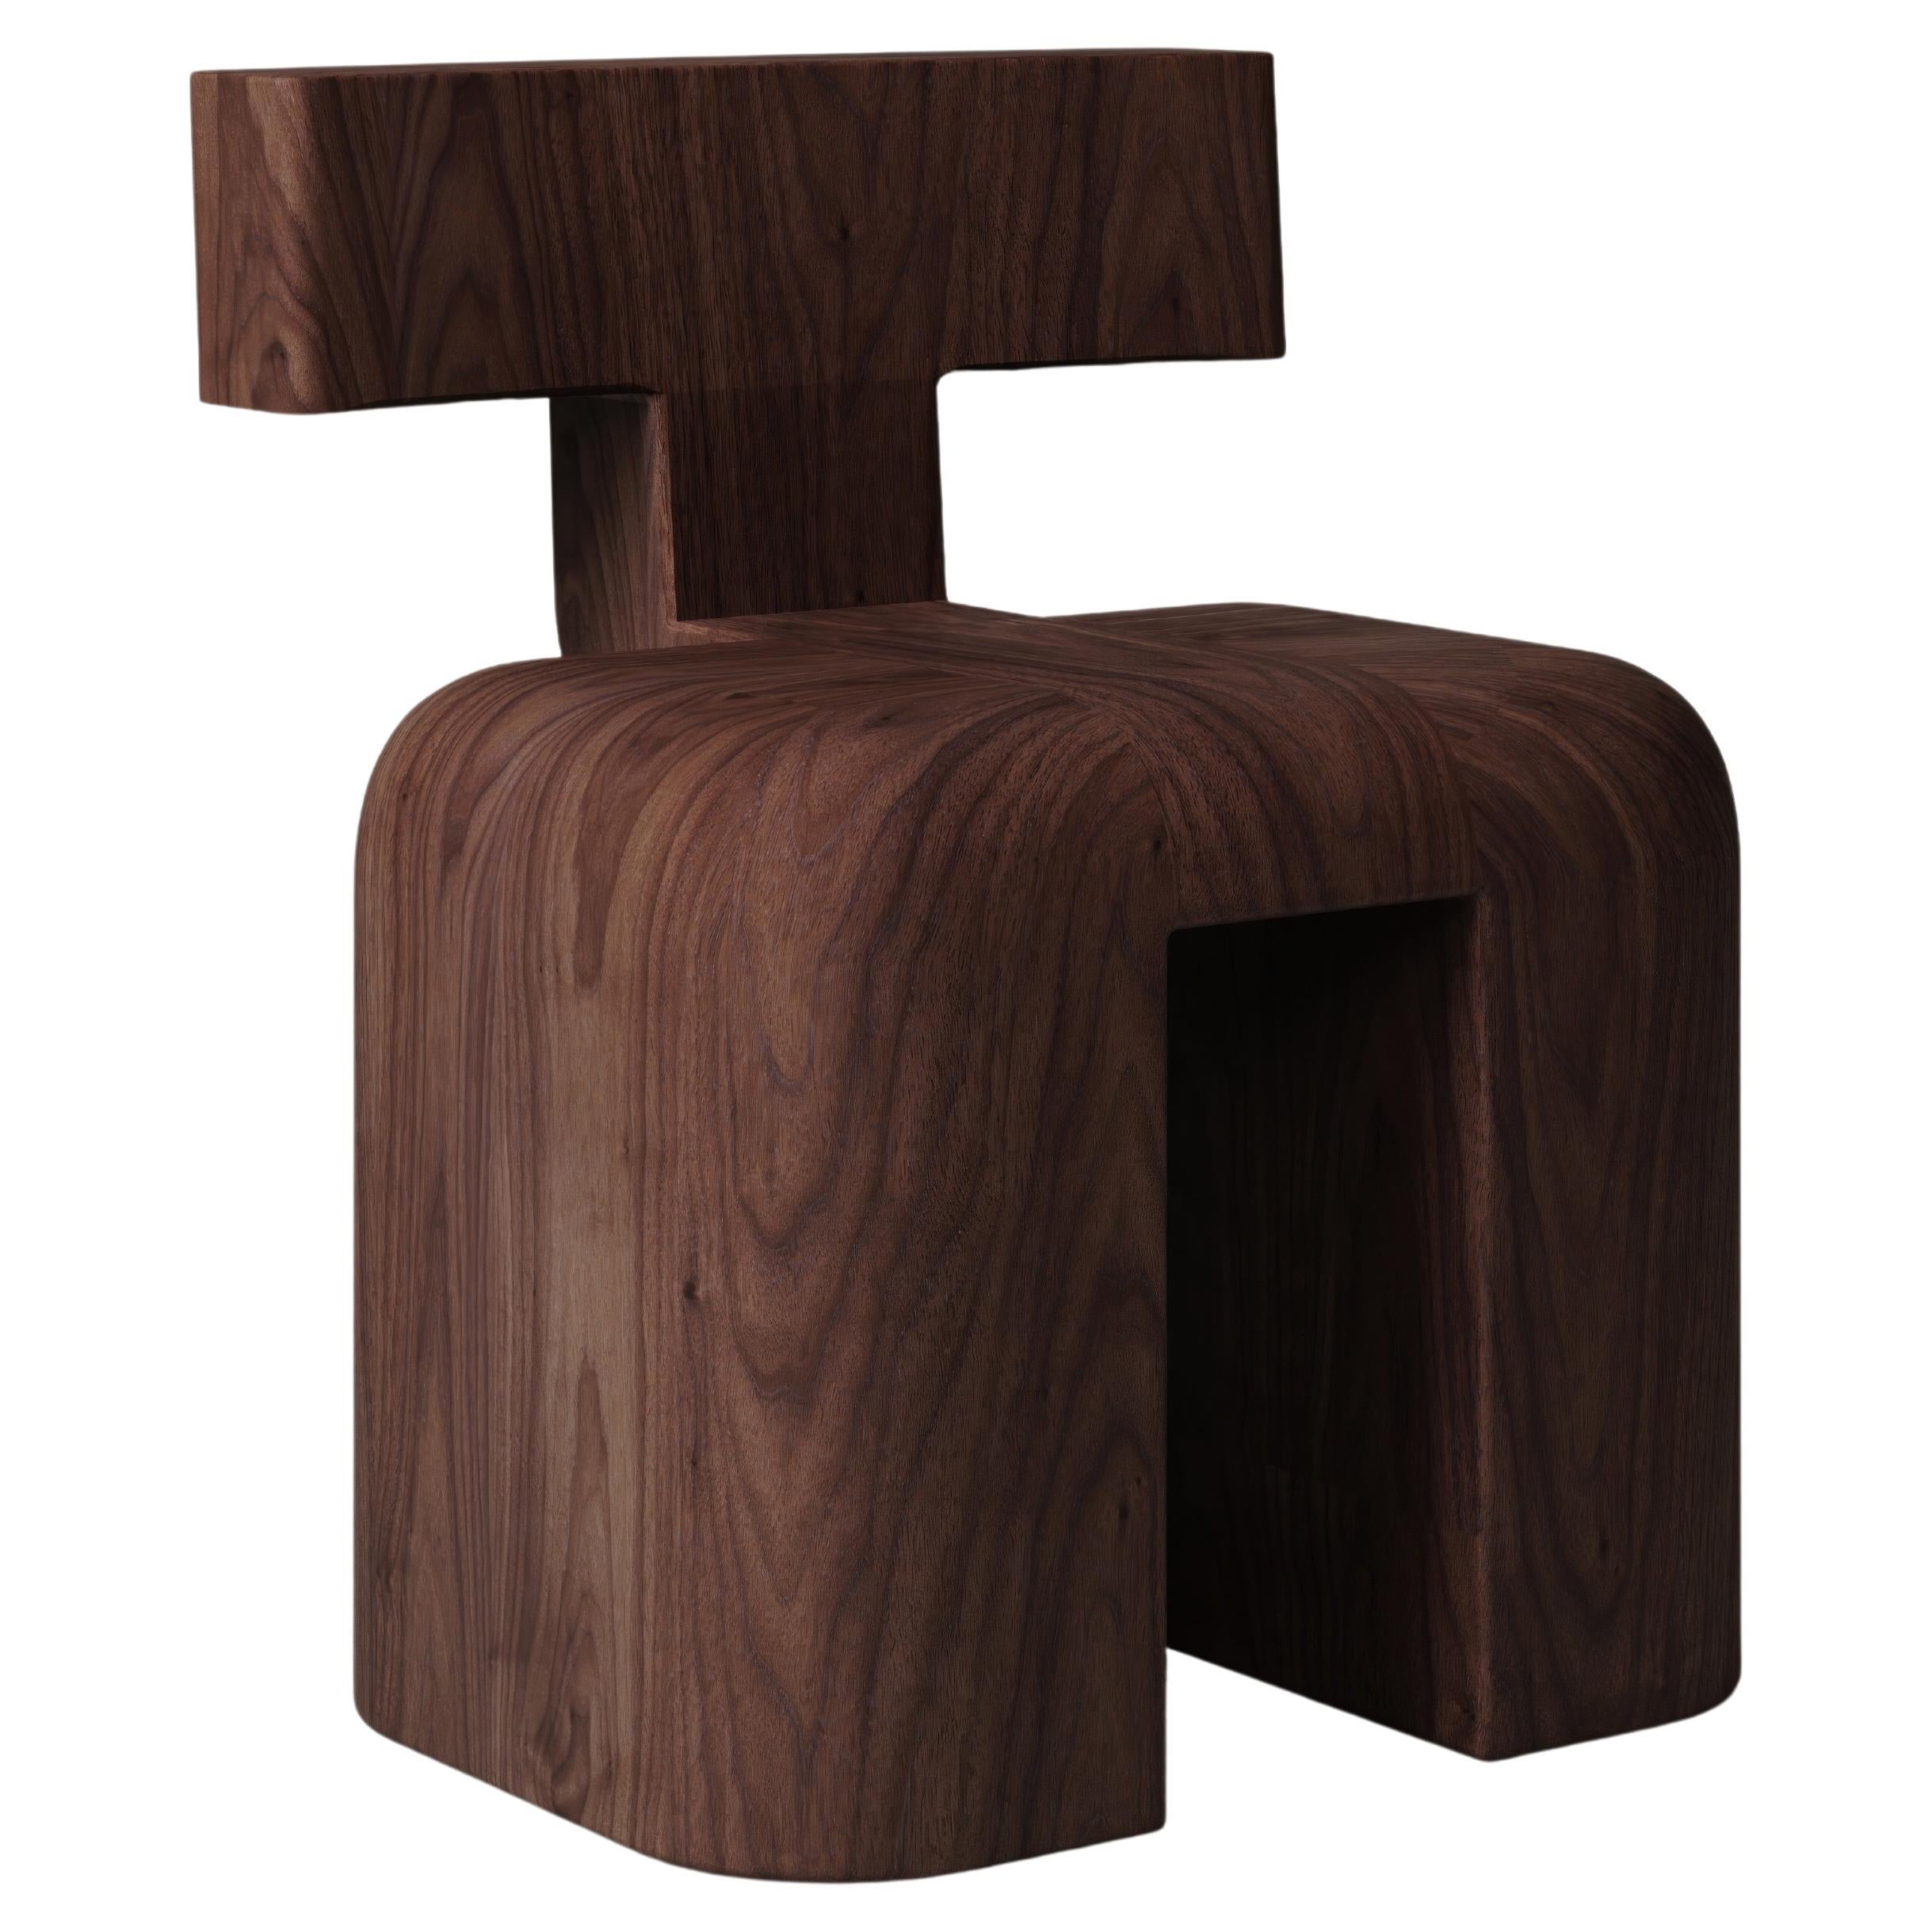 M_013 Chair / Walnut by Monolith Studio For Sale